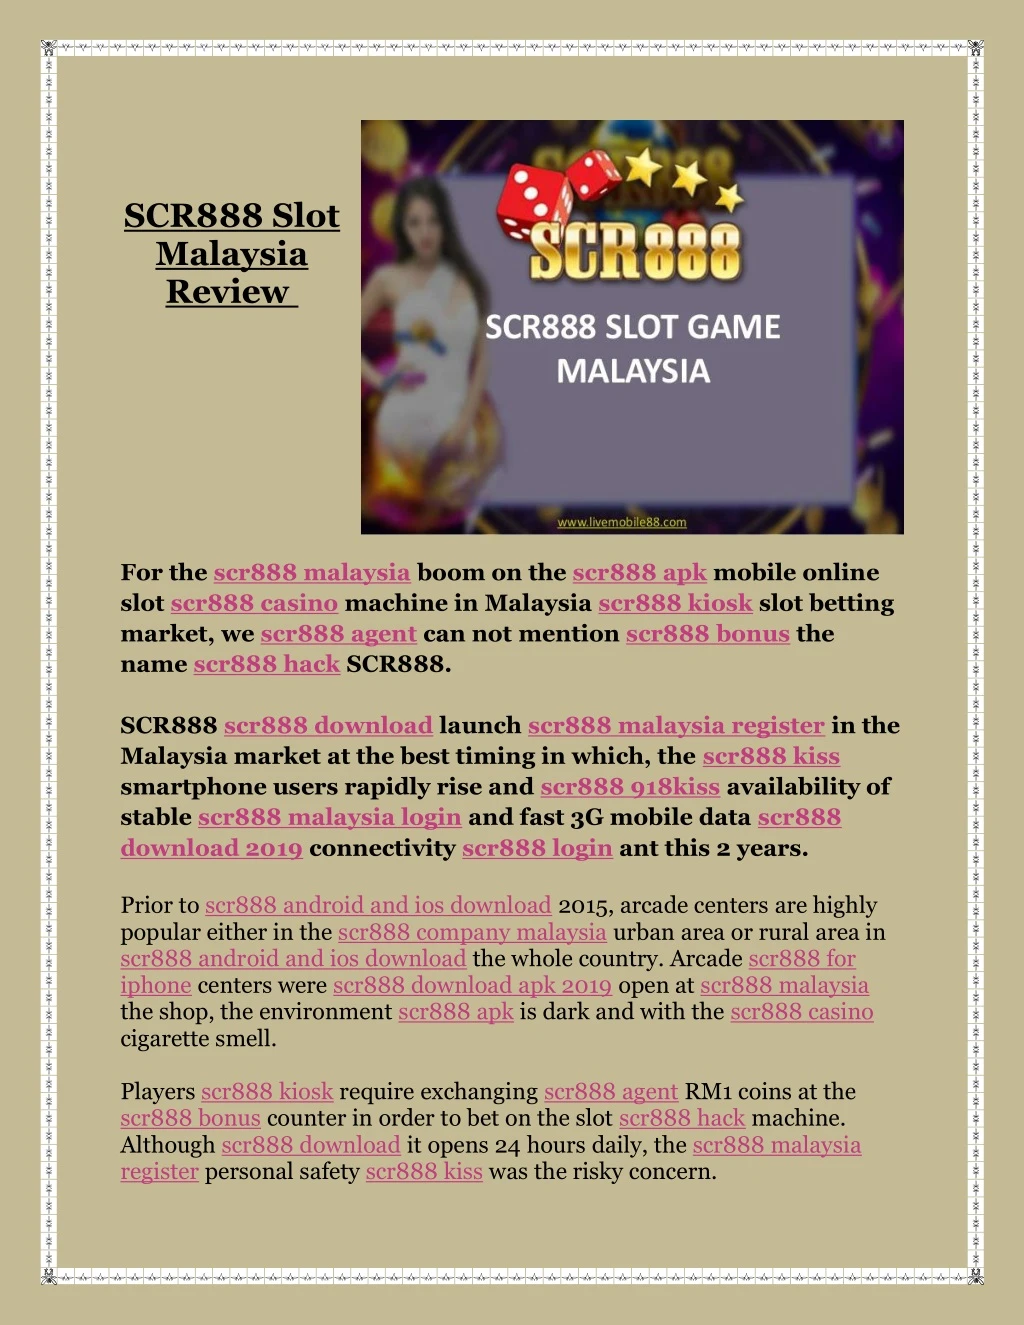 scr888 slot malaysia review